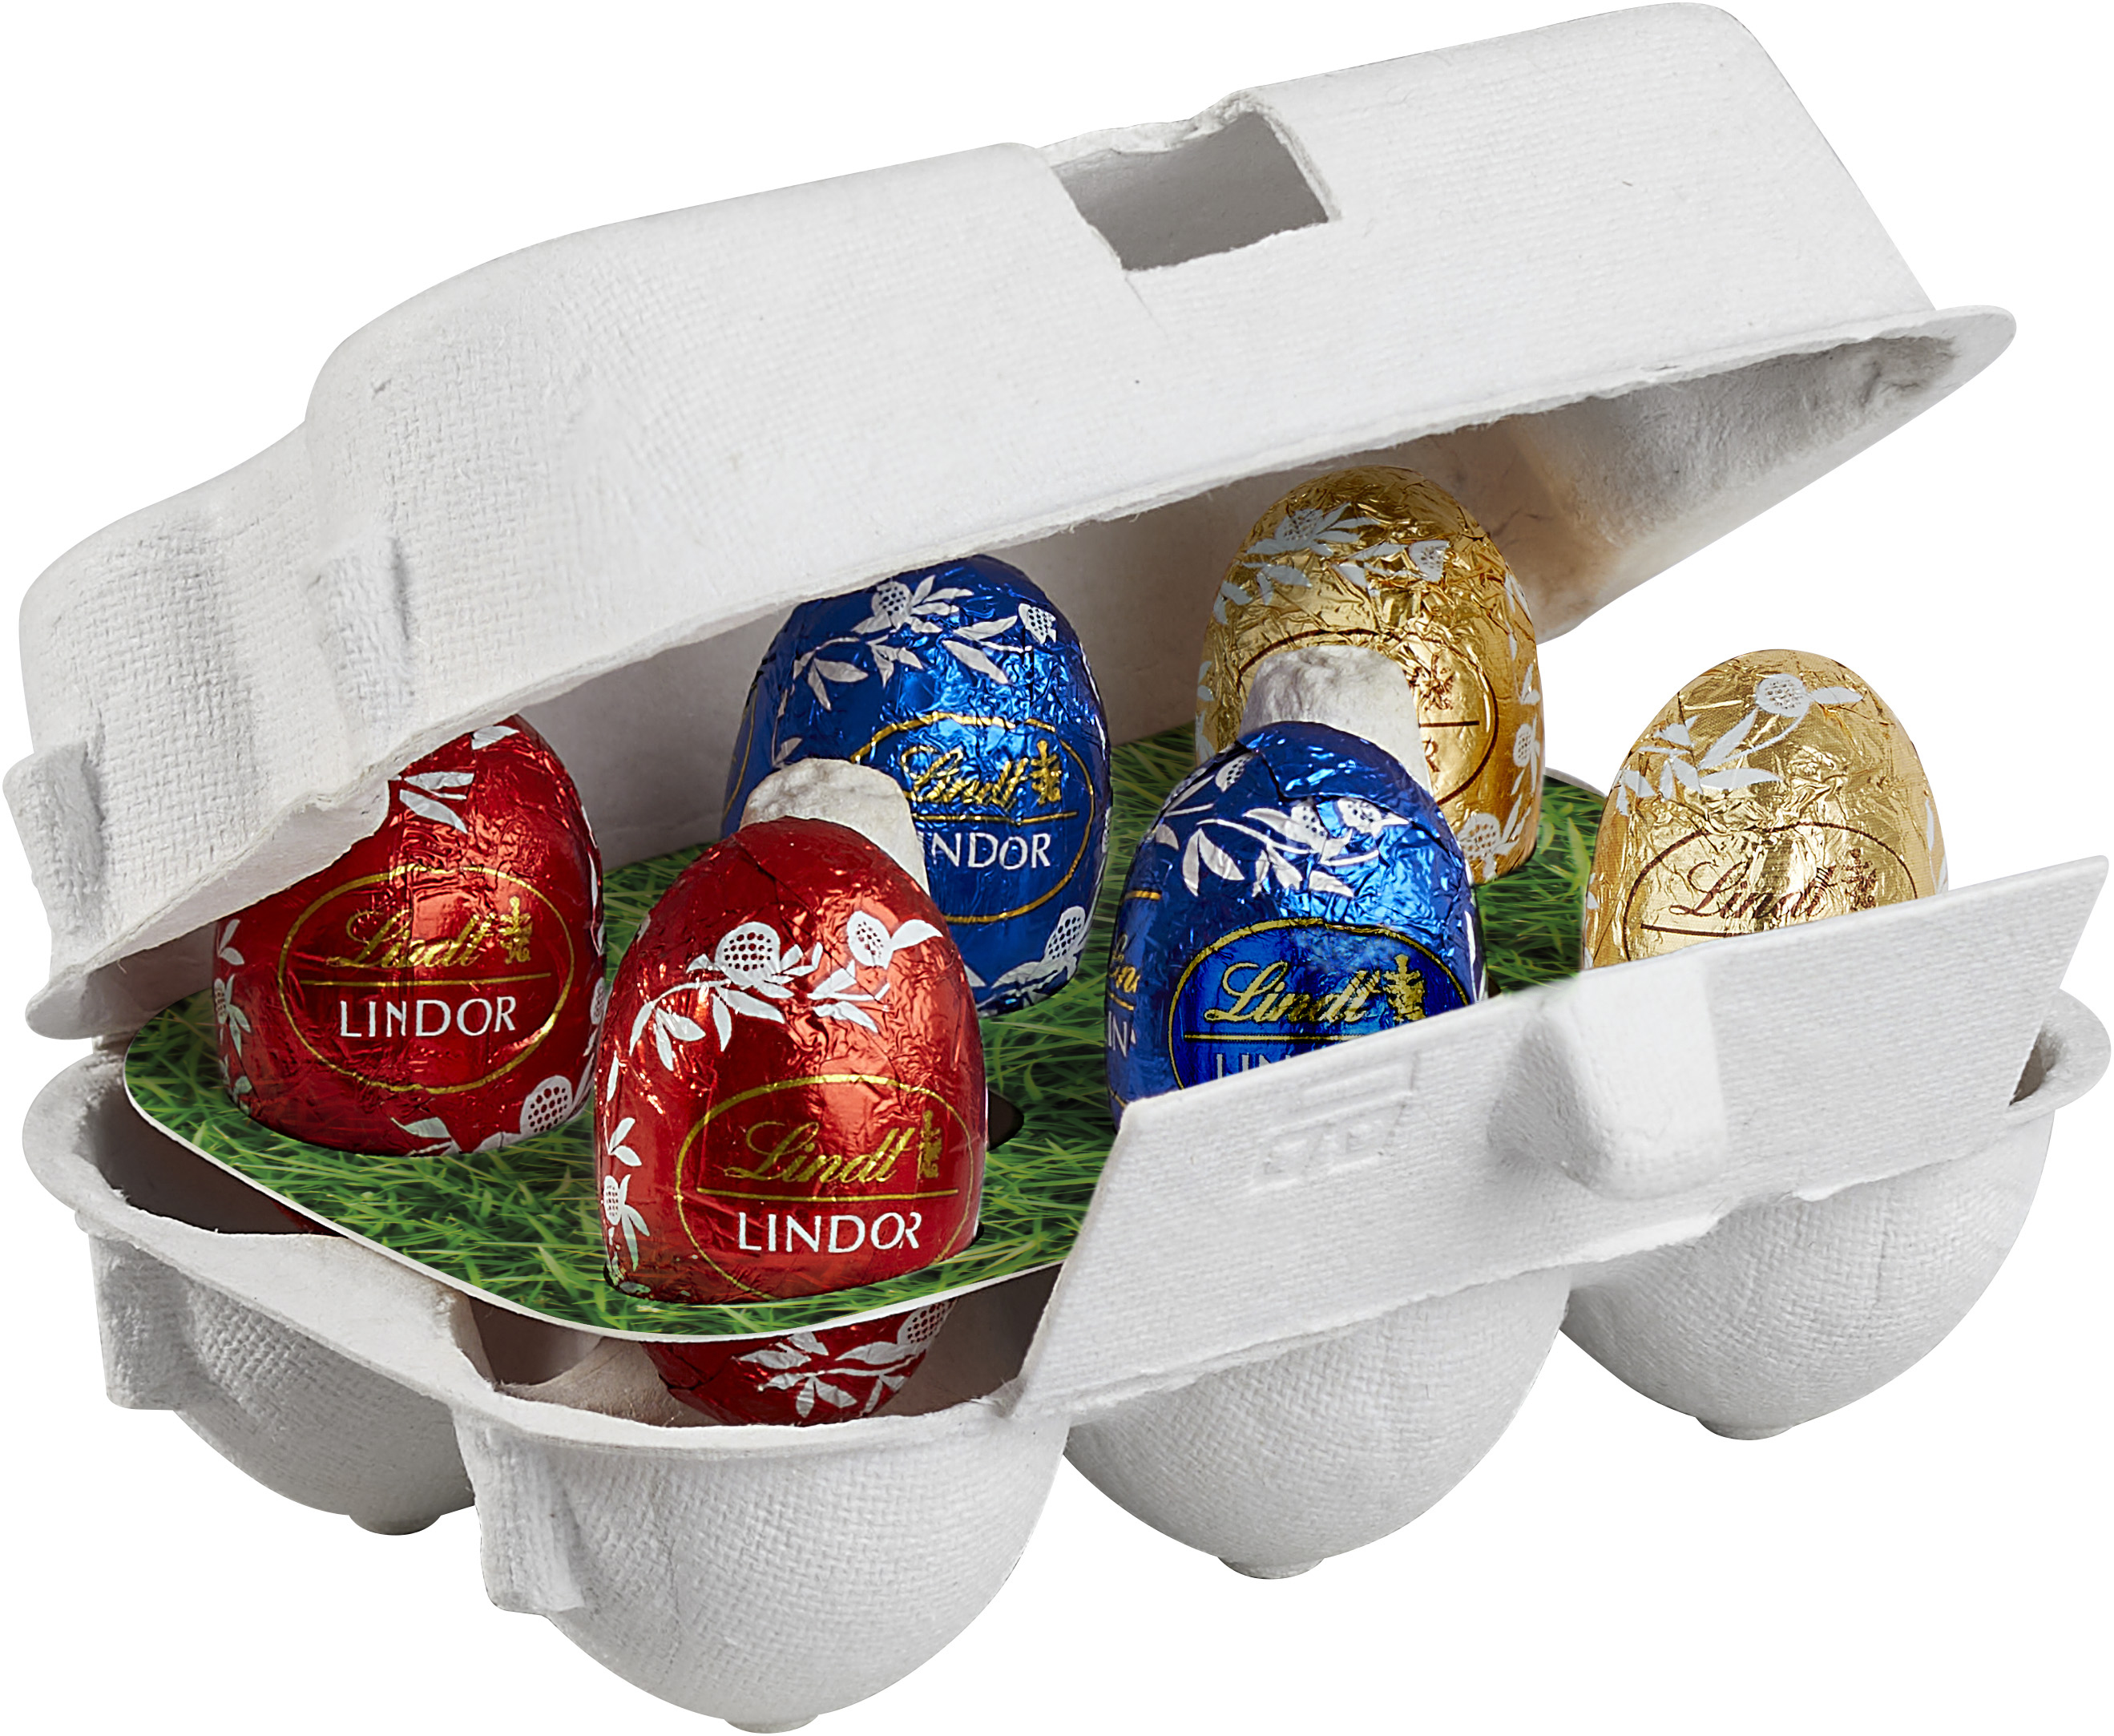 Mix of Lindt Lindor Mini Eggs (milk chocolate, white chocolate, fine dark chocolate with tender-melting fillings (40%))